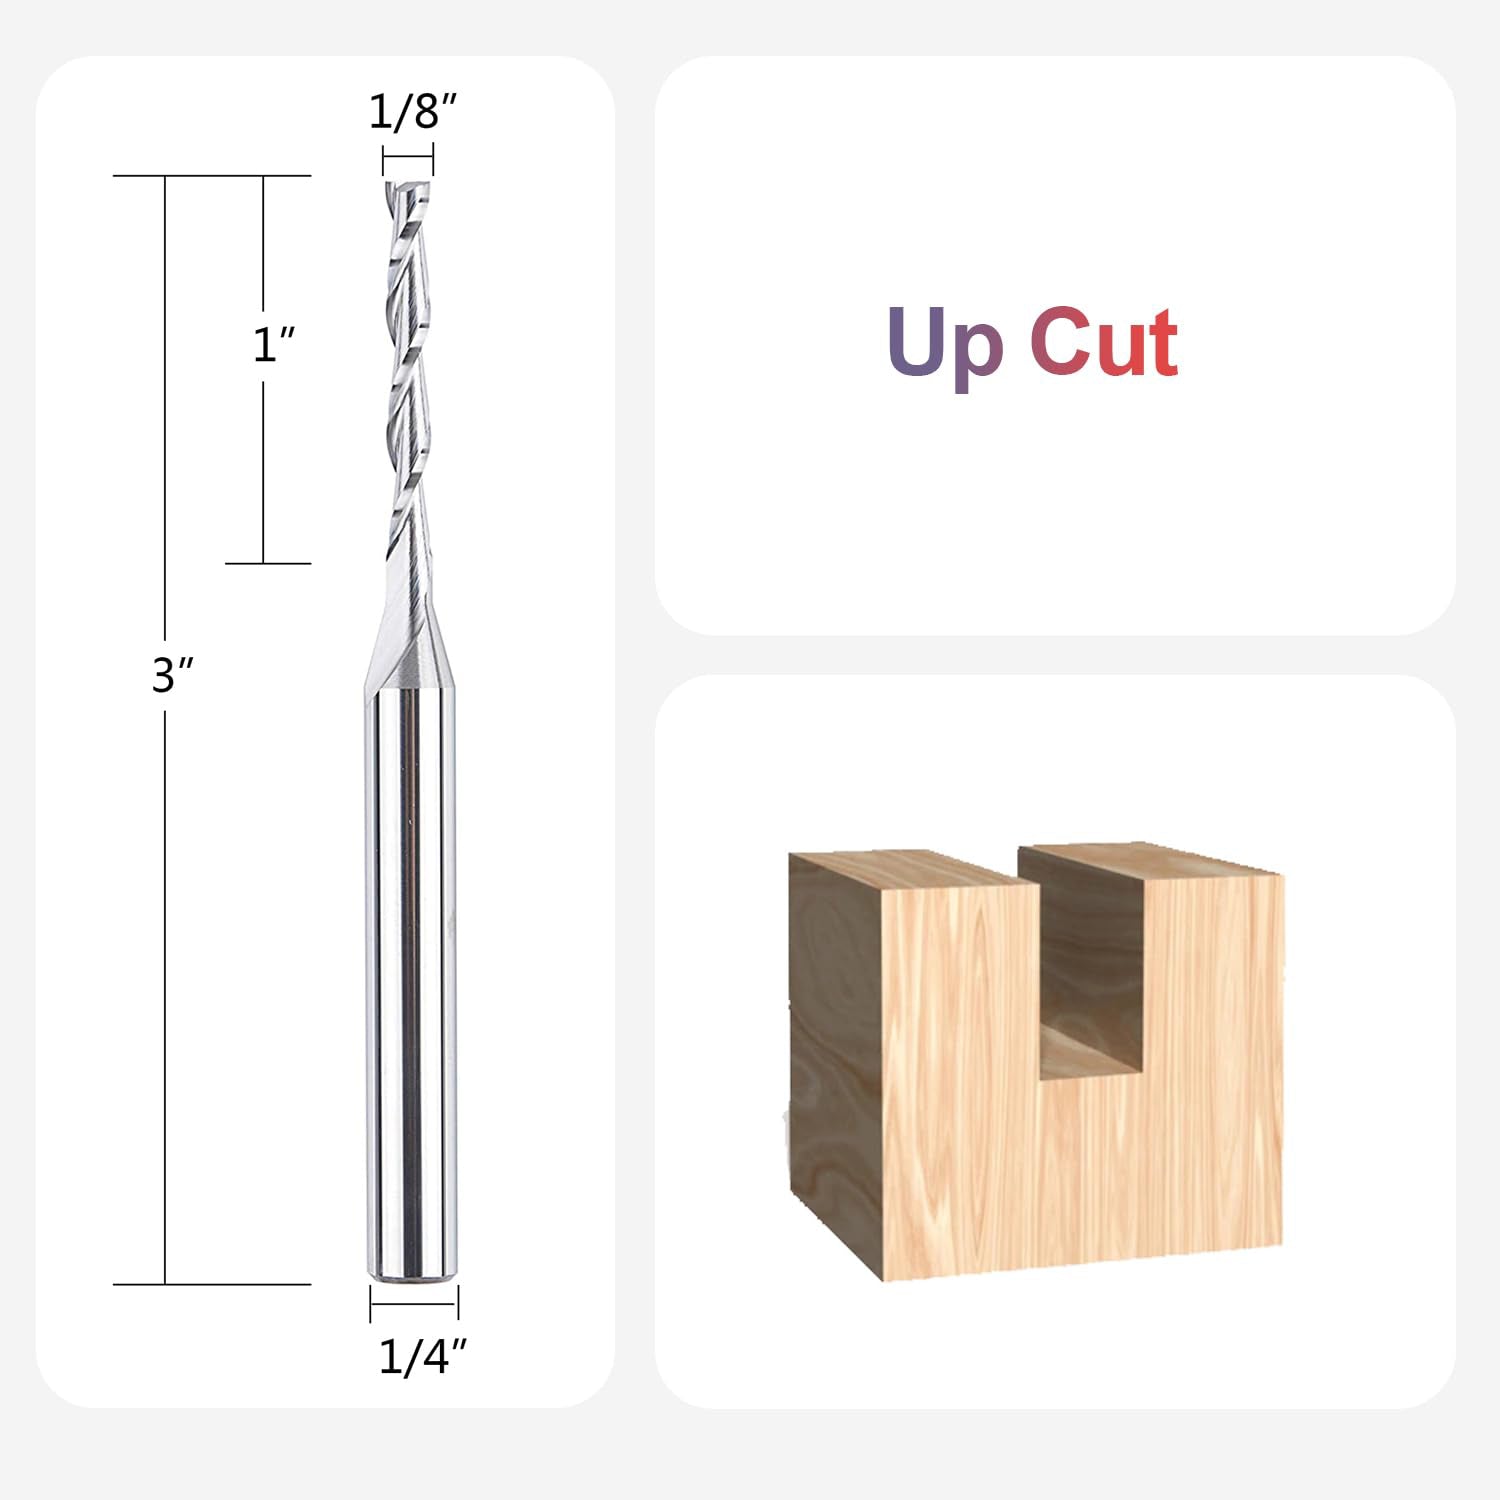 SpeTool W04017 SC Spiral Plunge 1/8" Dia x 1/4" Shank x 1" Cutting Length 3" Extra Long 2 Flute Up-Cut Router Bit